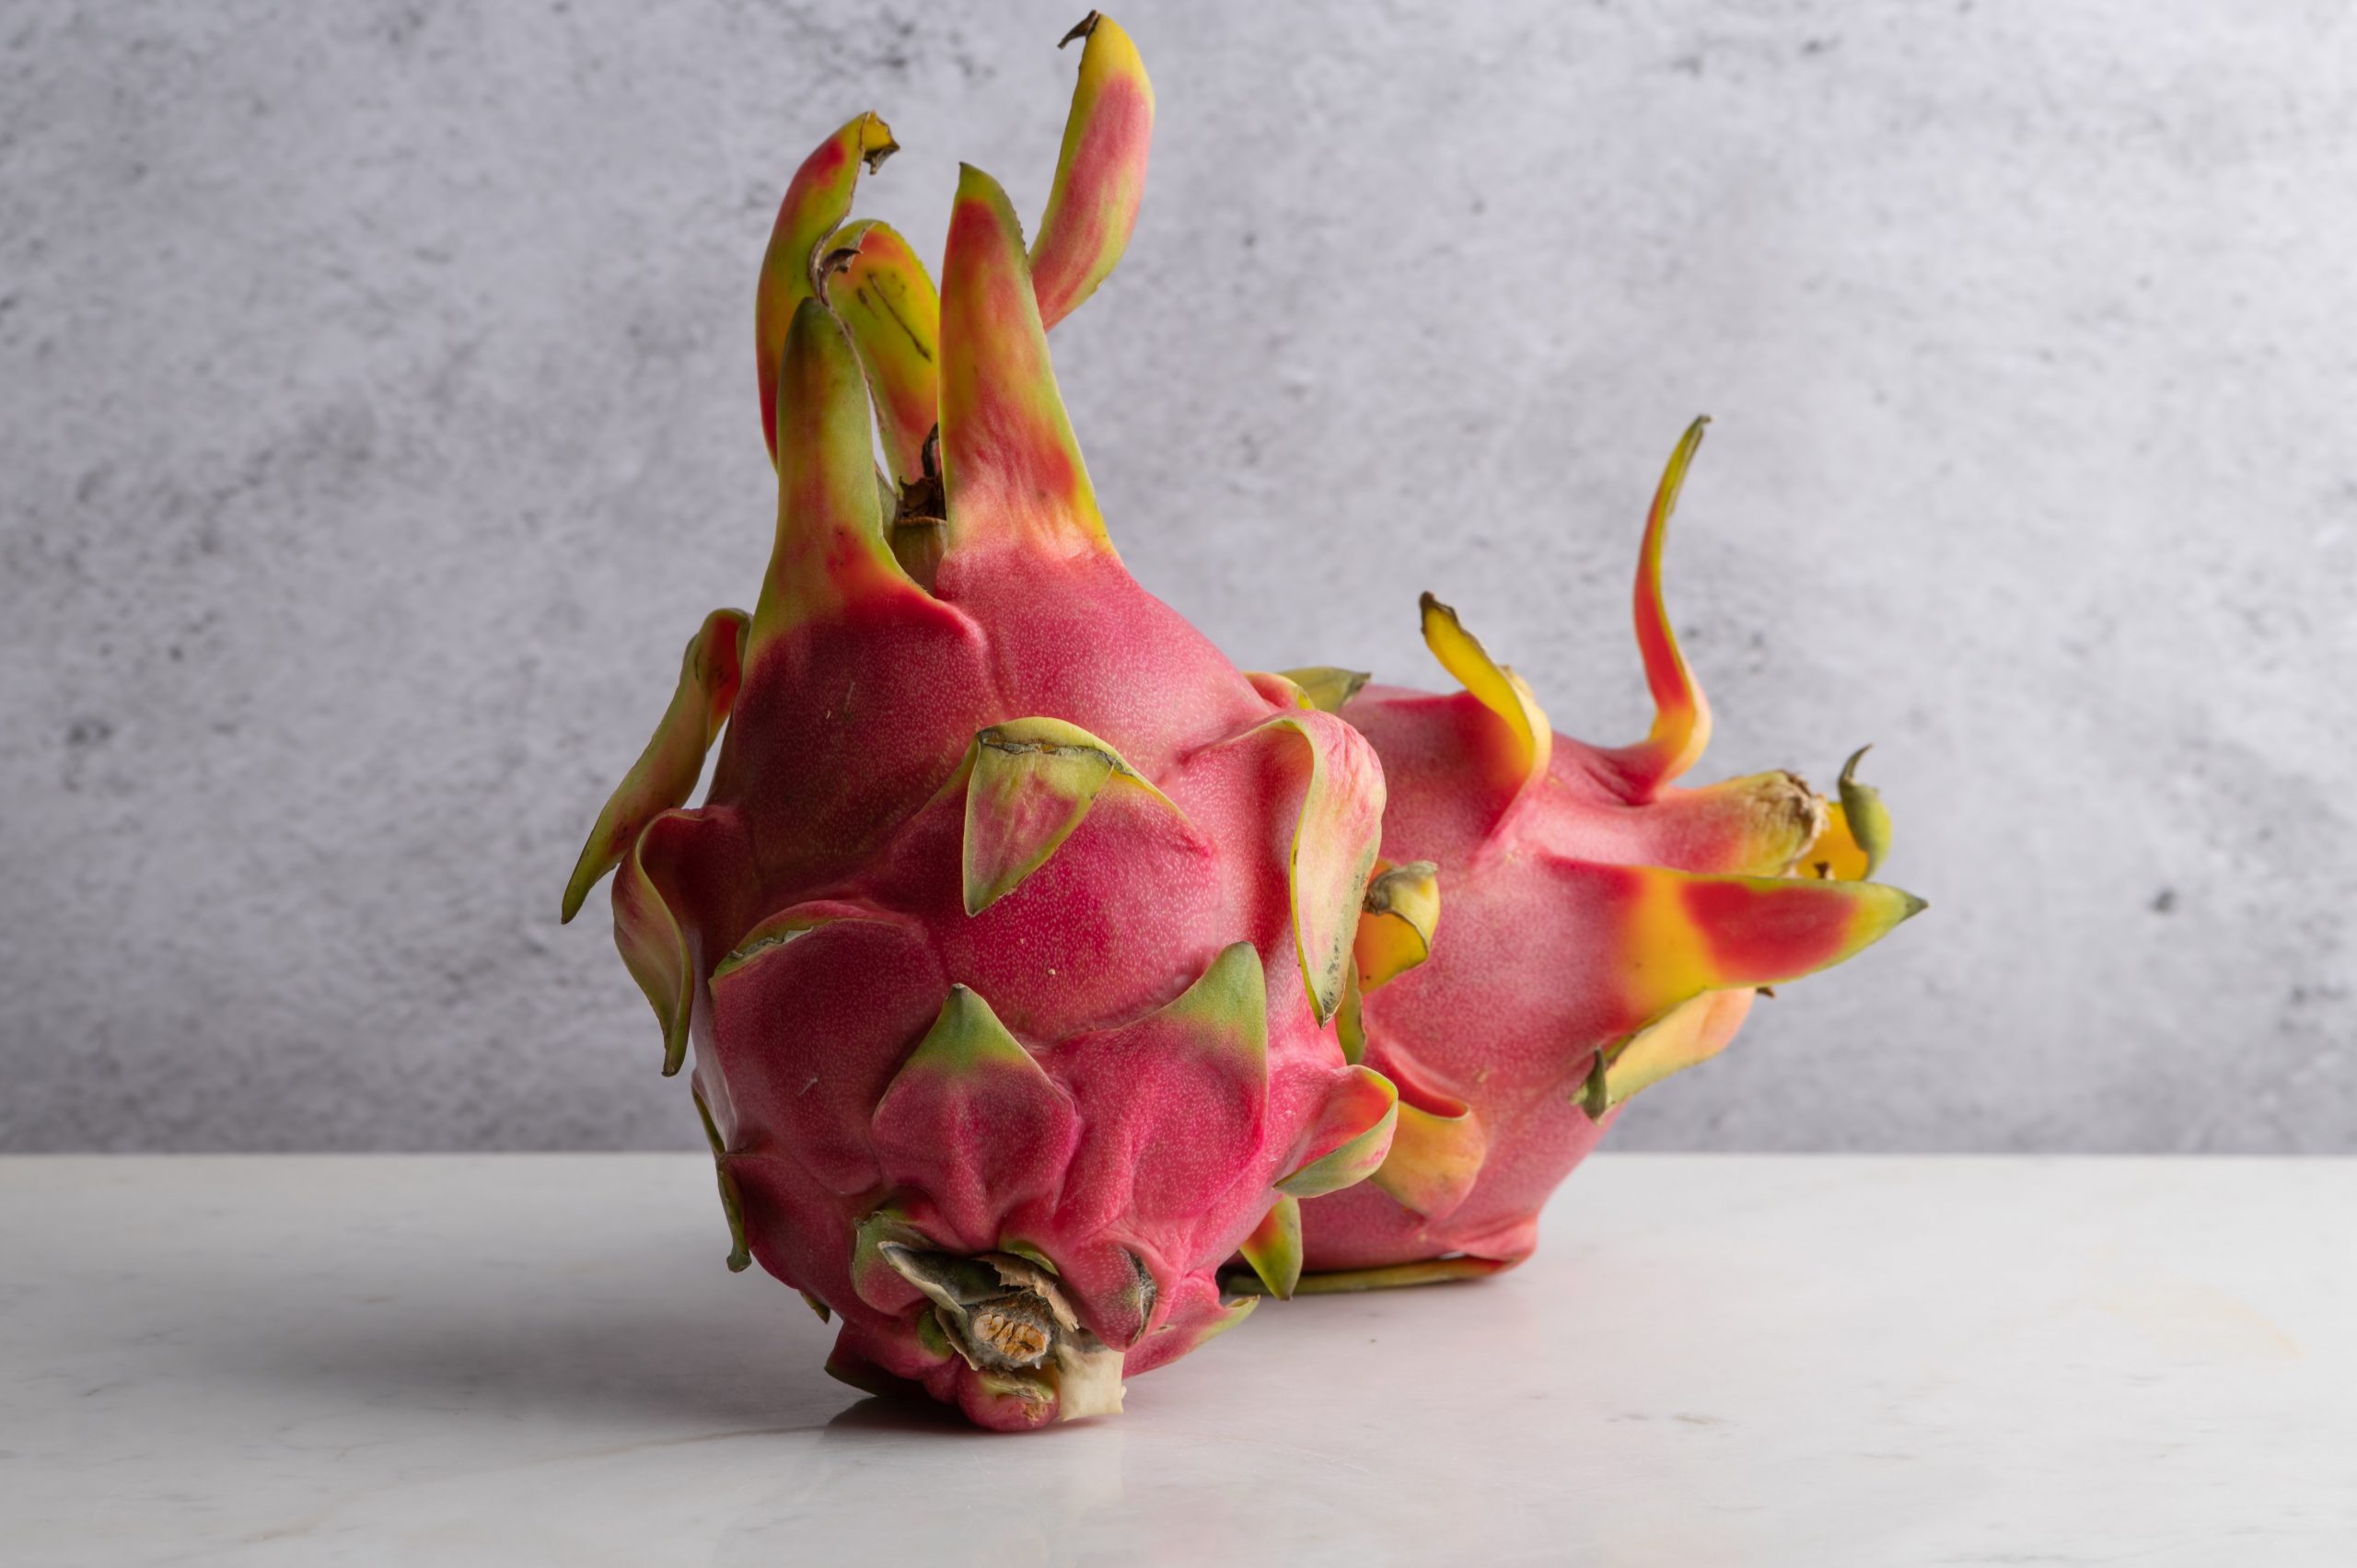 How to store dragon fruit?